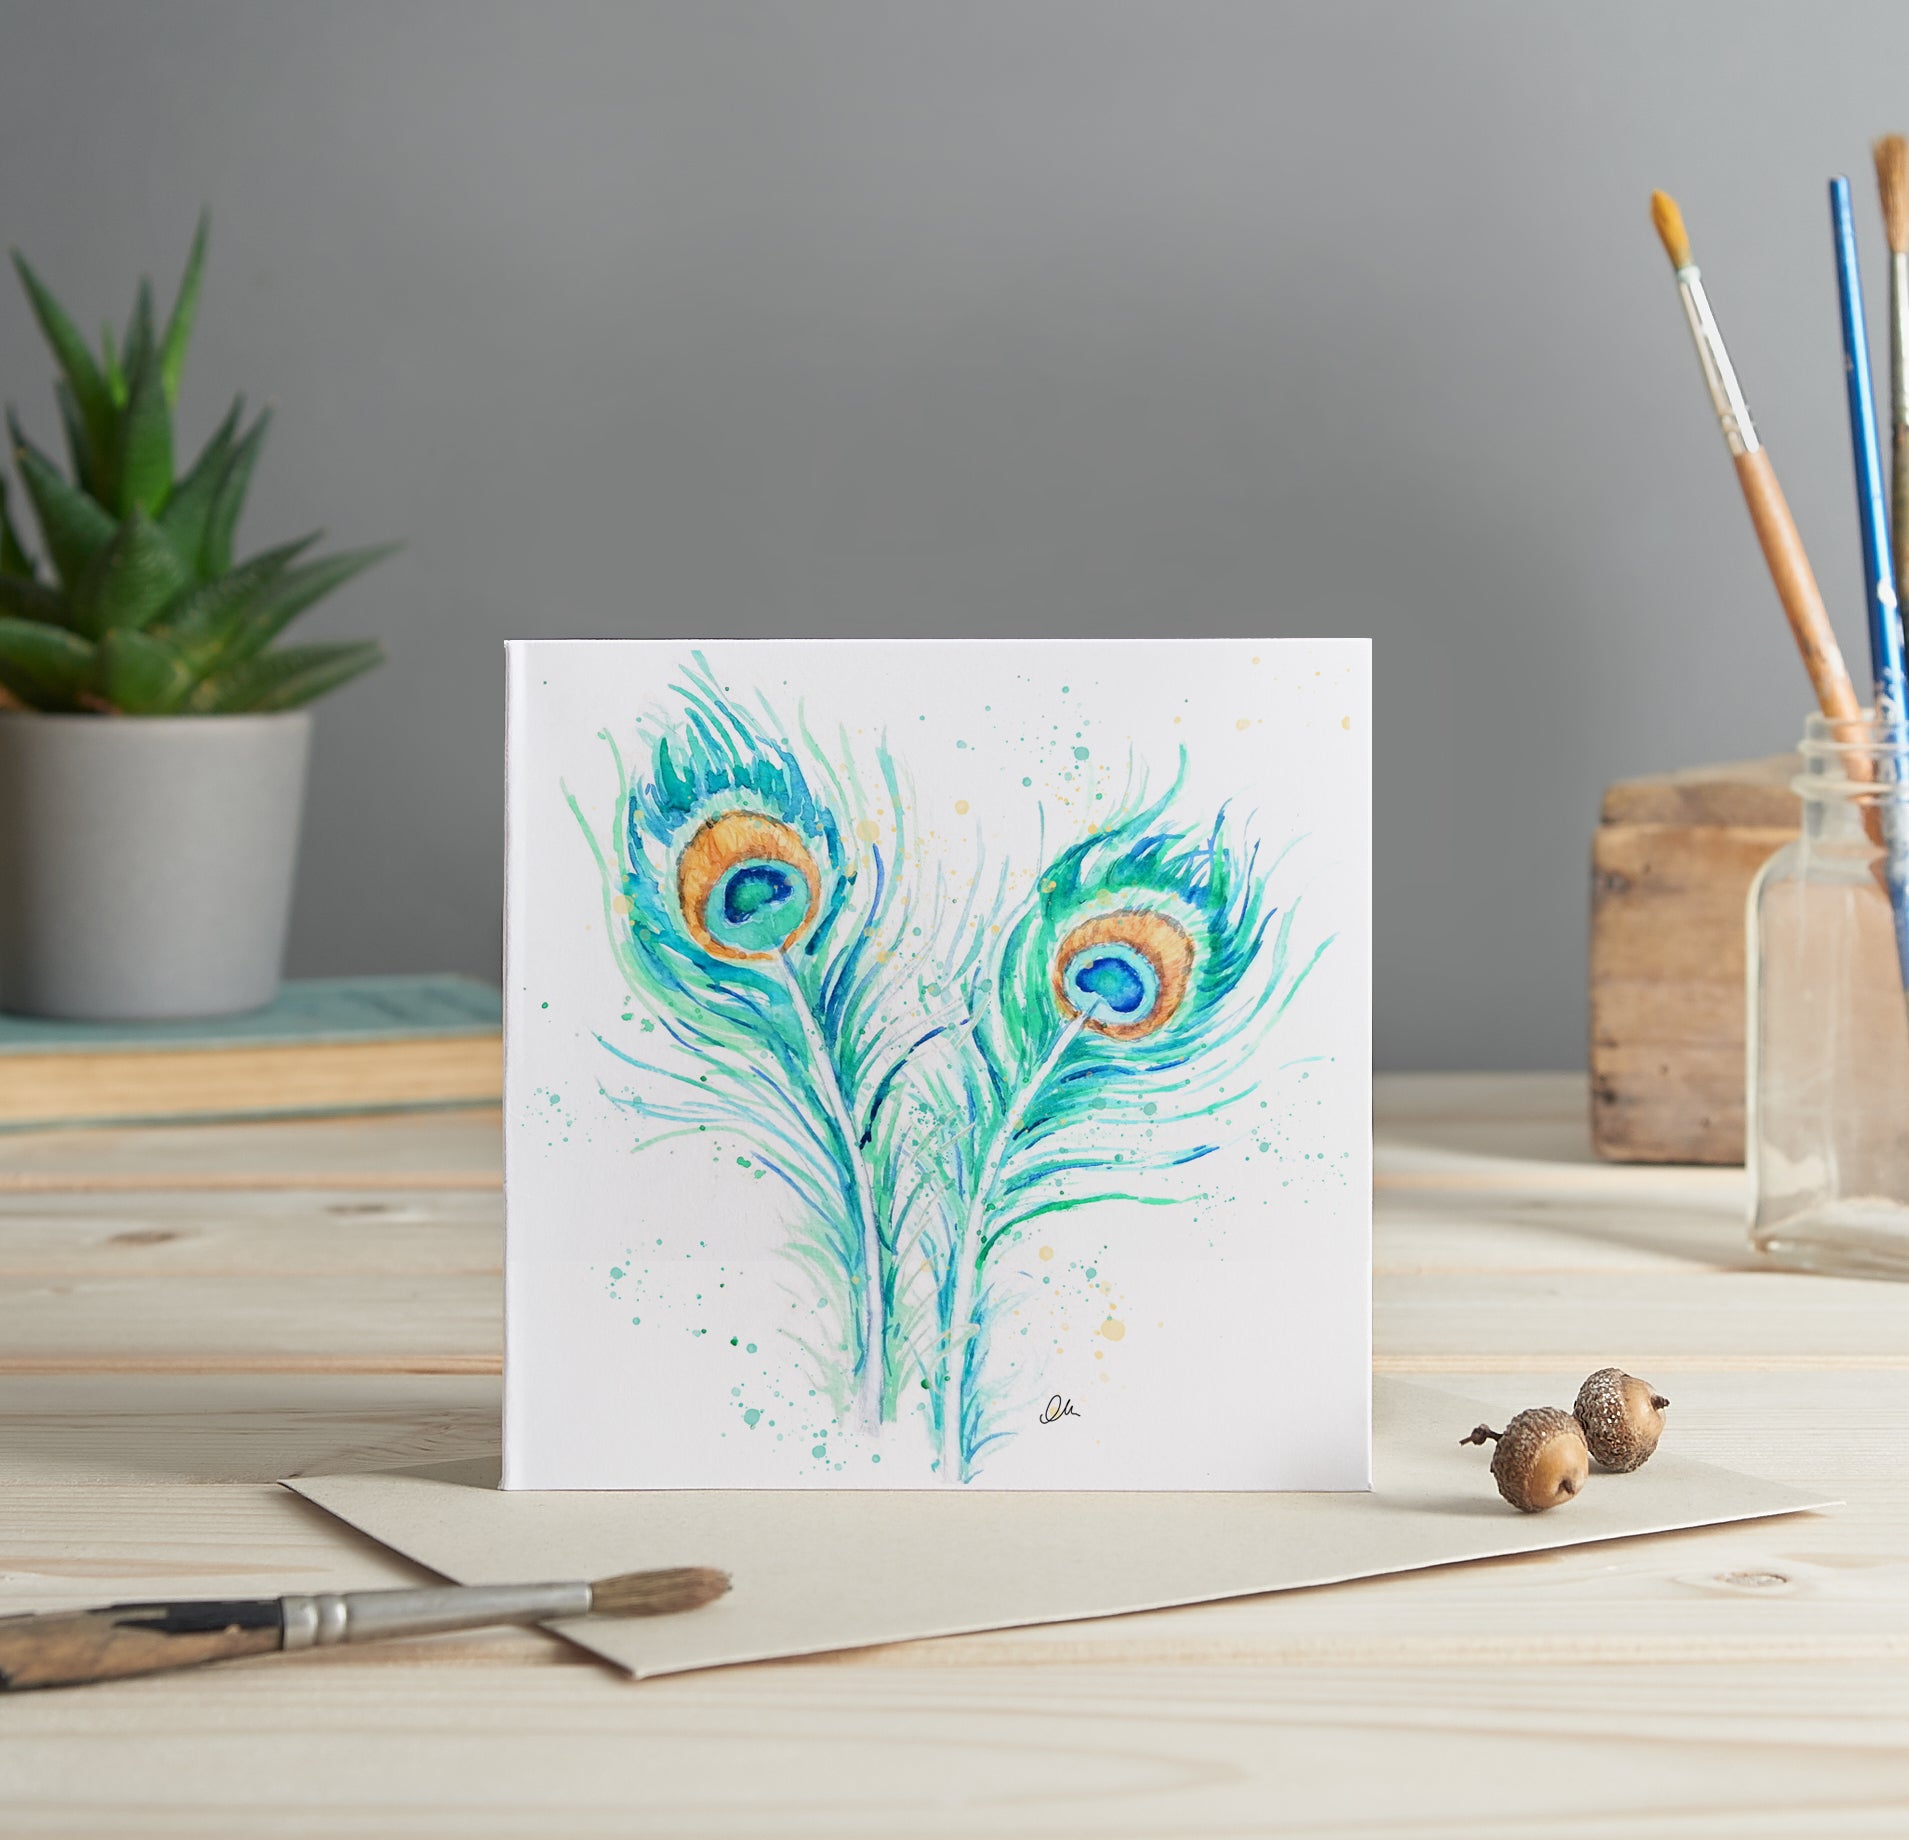 Peacock feathers illustrated greeting card